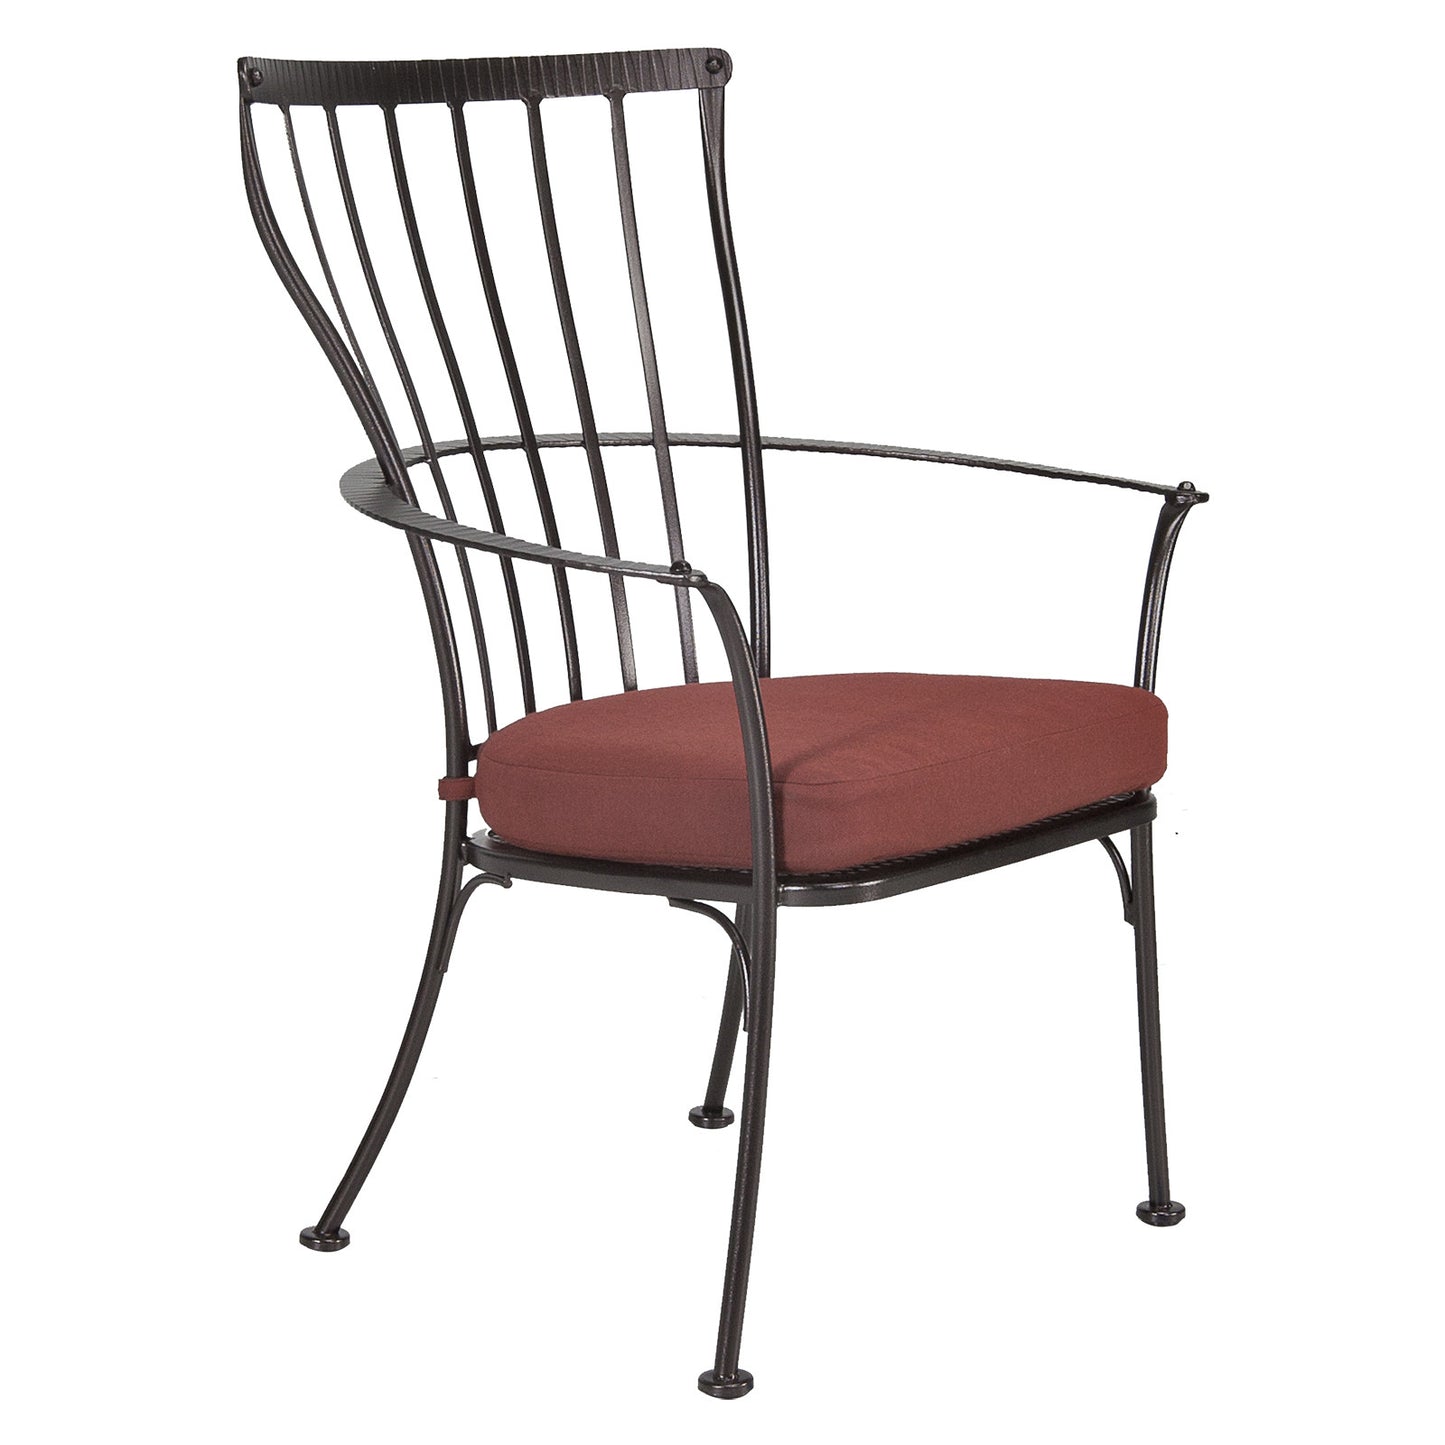 O.W. Lee Monterra Outdoor Patio Dining Arm Chair is available at Jacobs Custom Living.